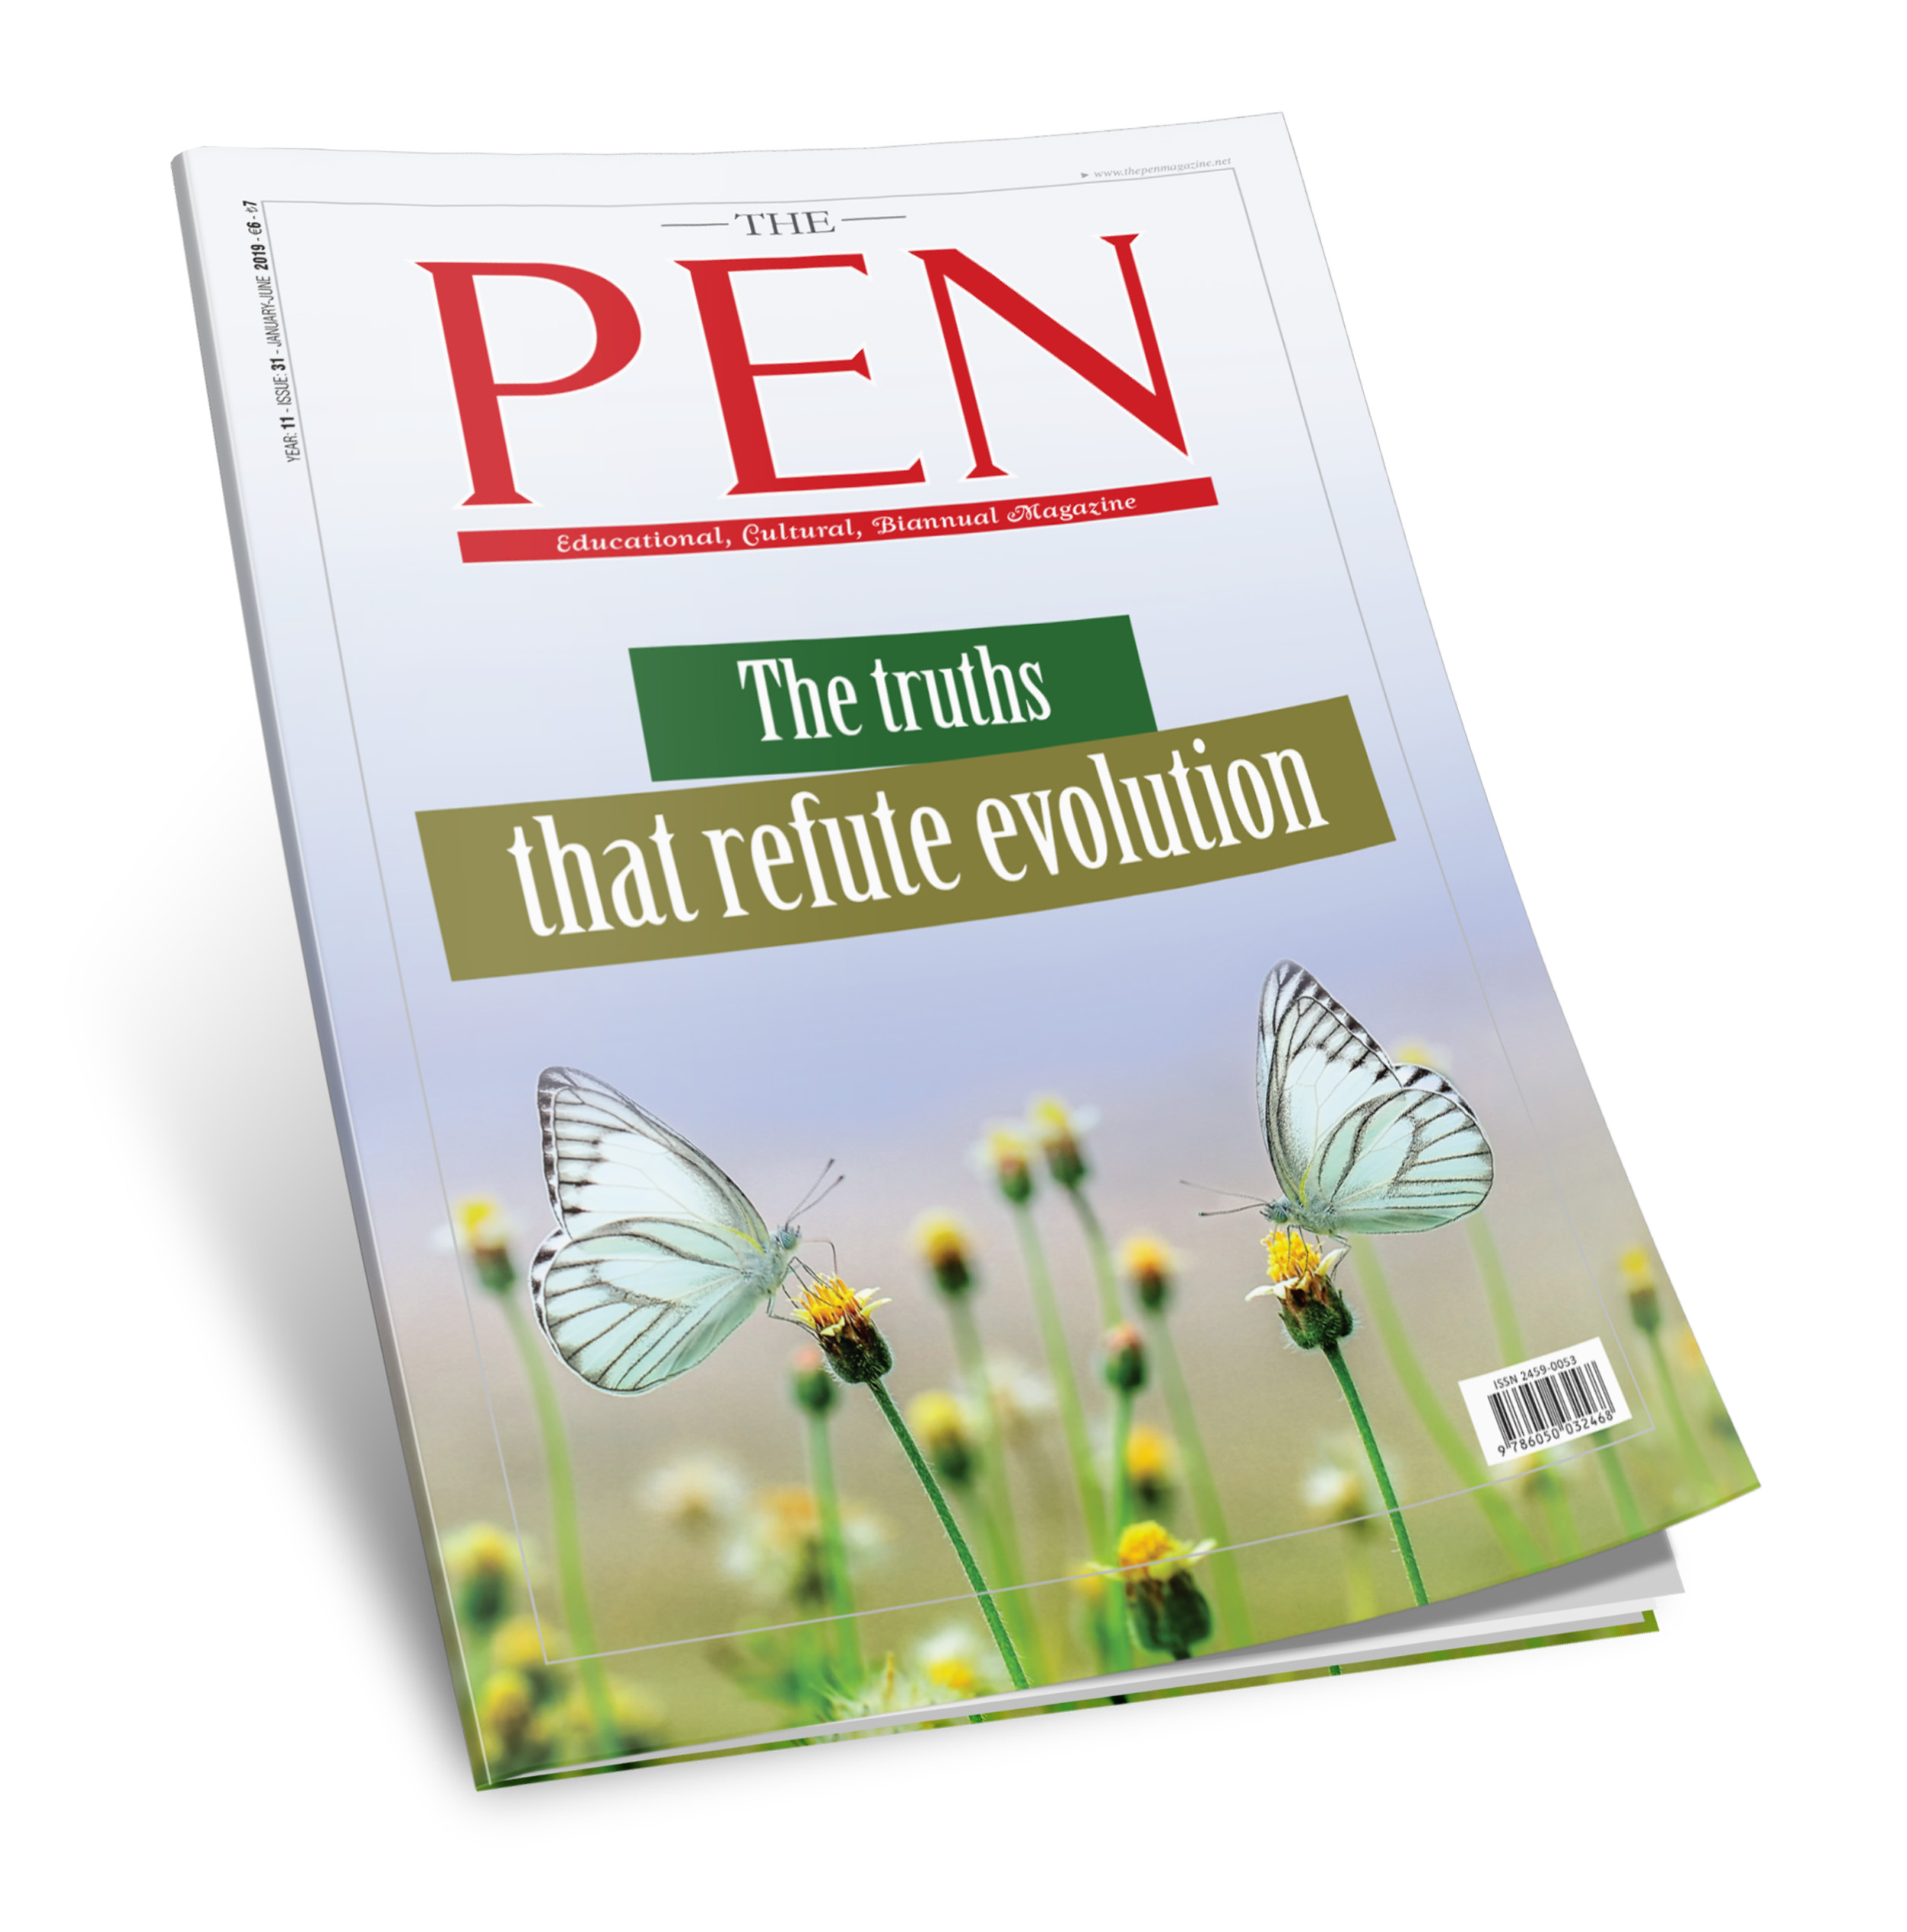 The Pen 31st issue